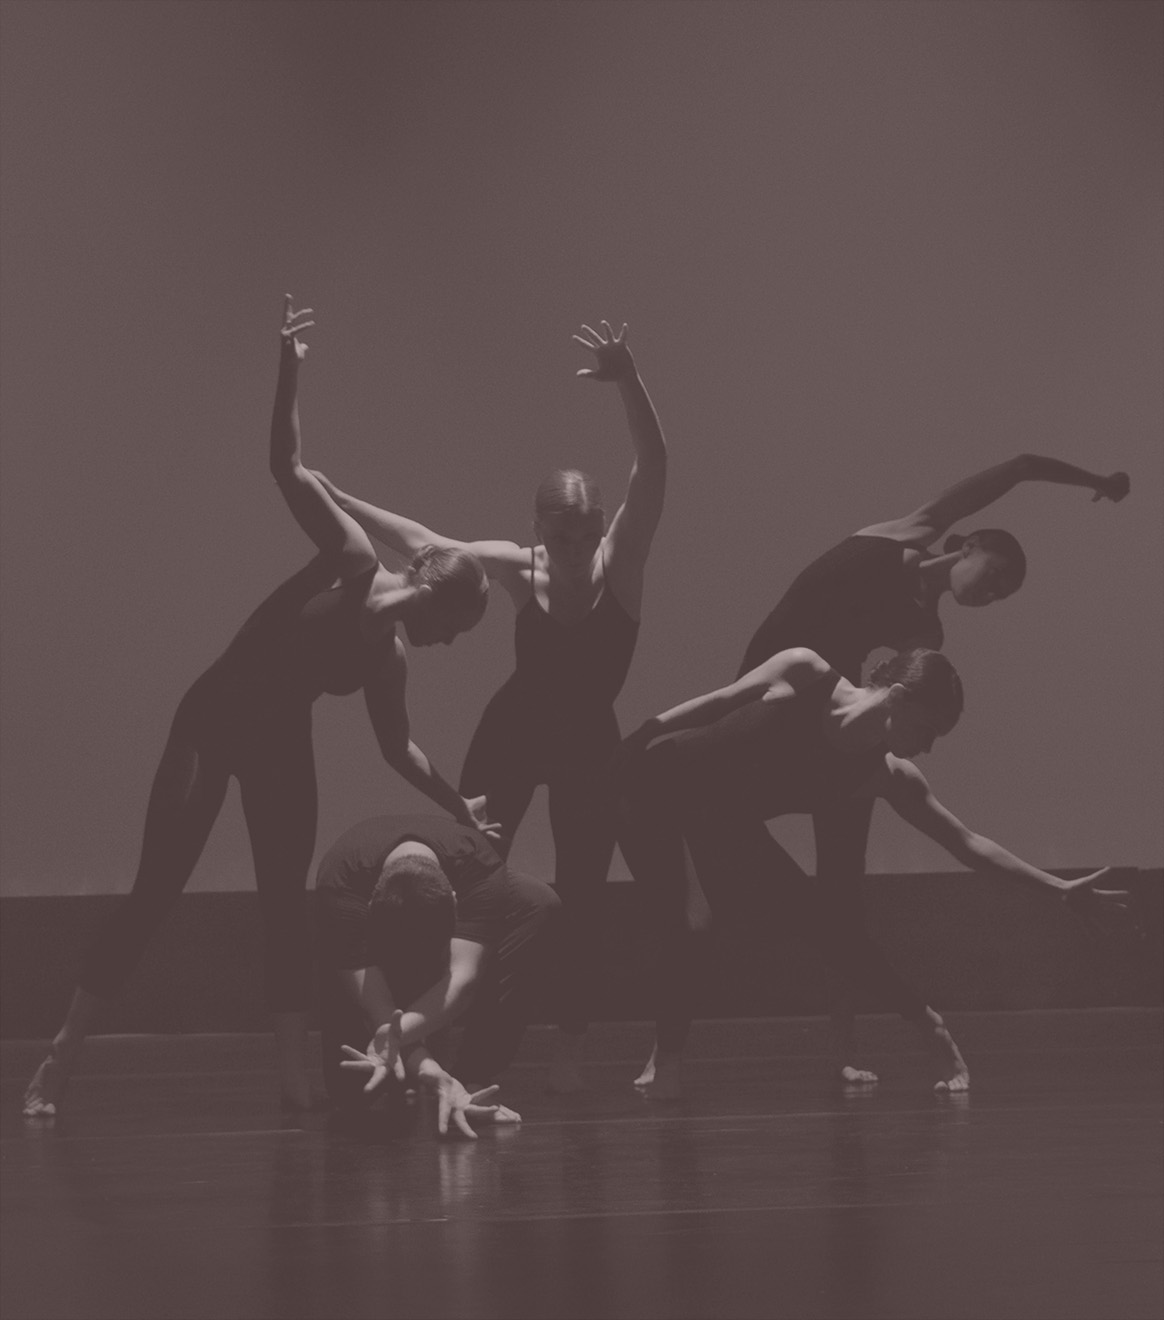 Stylized image showing five dancers staging different poses on theatre stage wearing black clothes